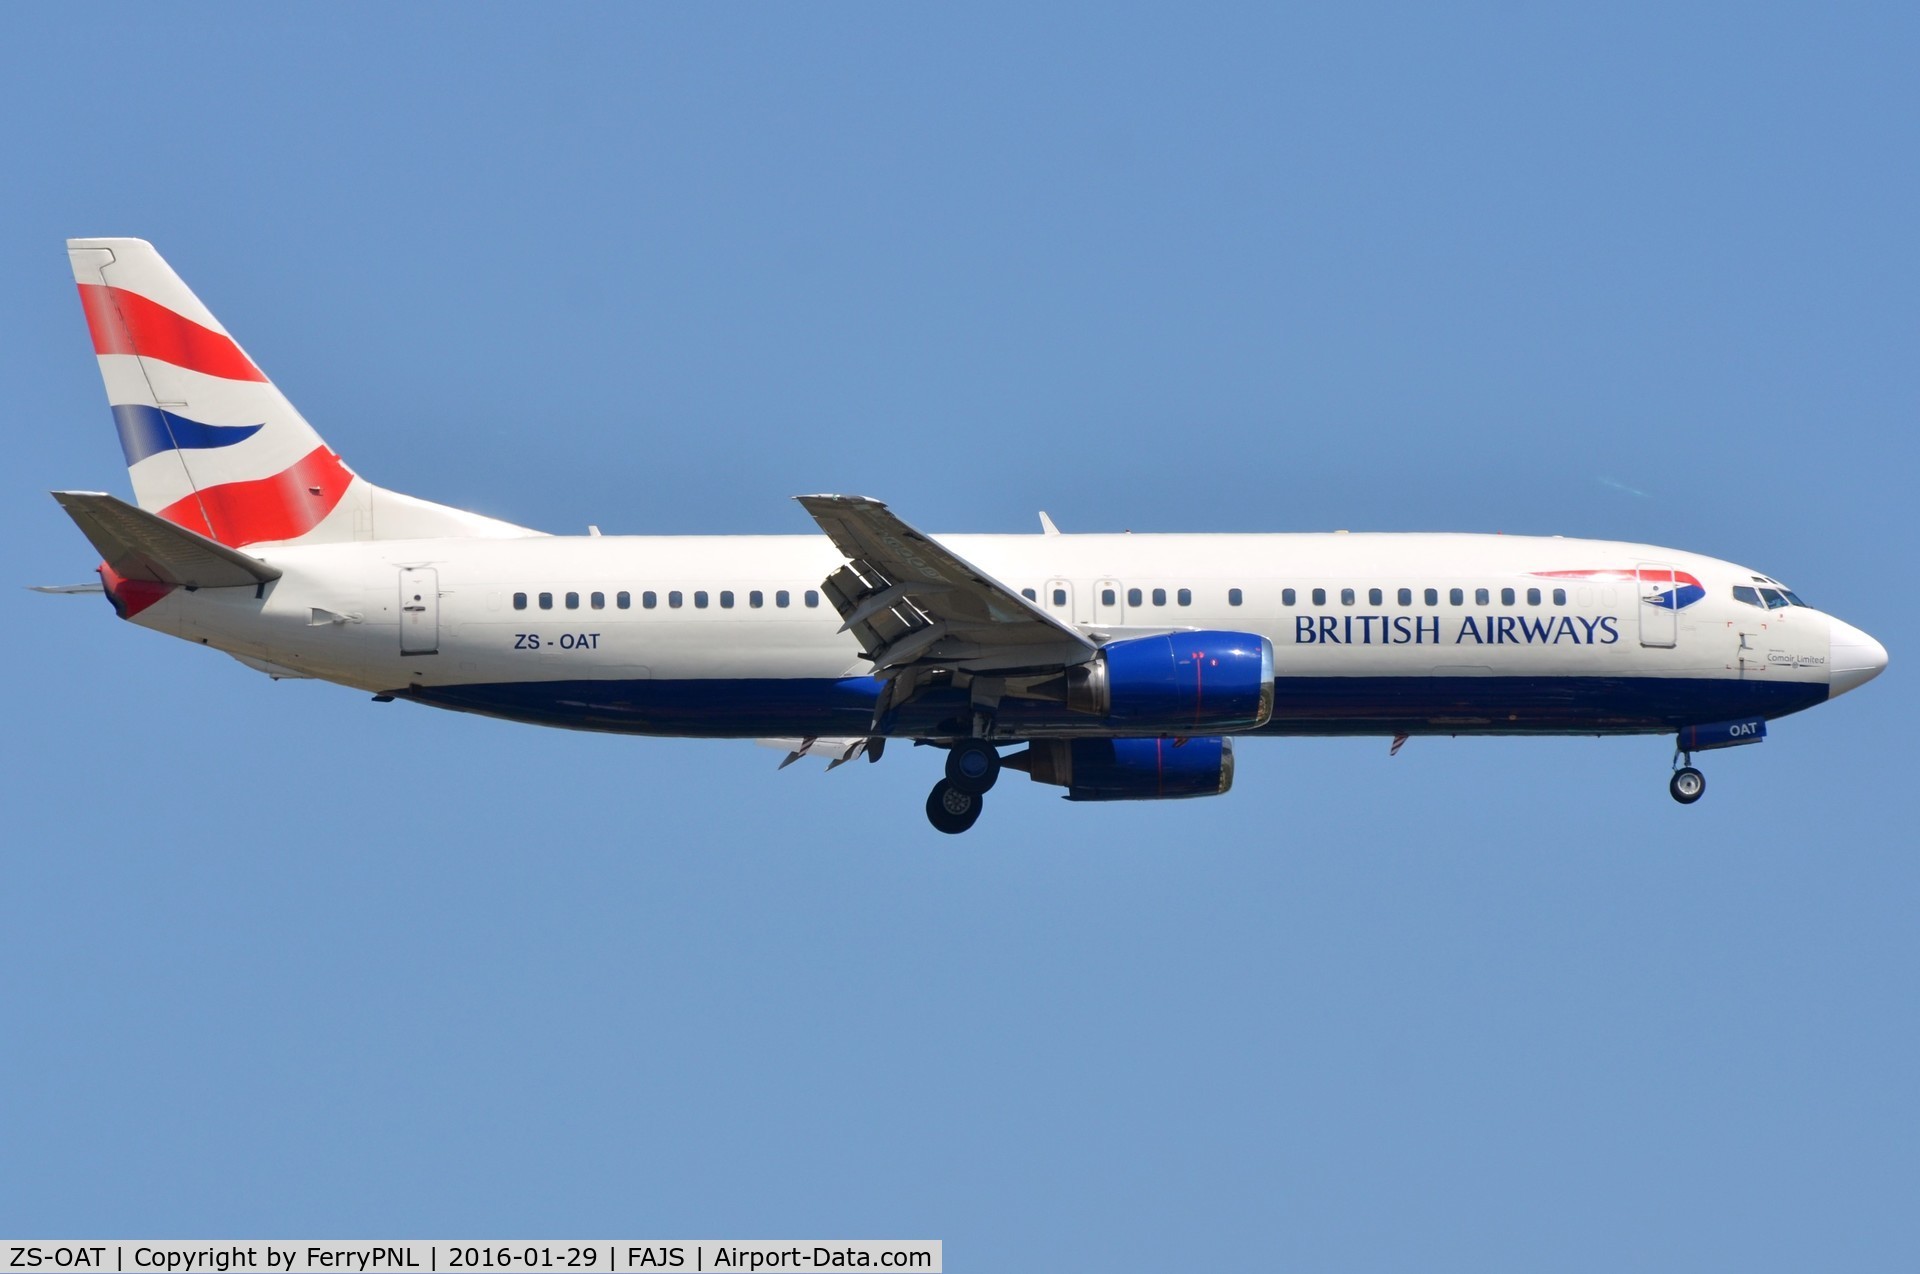 ZS-OAT, 1995 Boeing 737-476 C/N 28150, Comair operating this B734 for BA